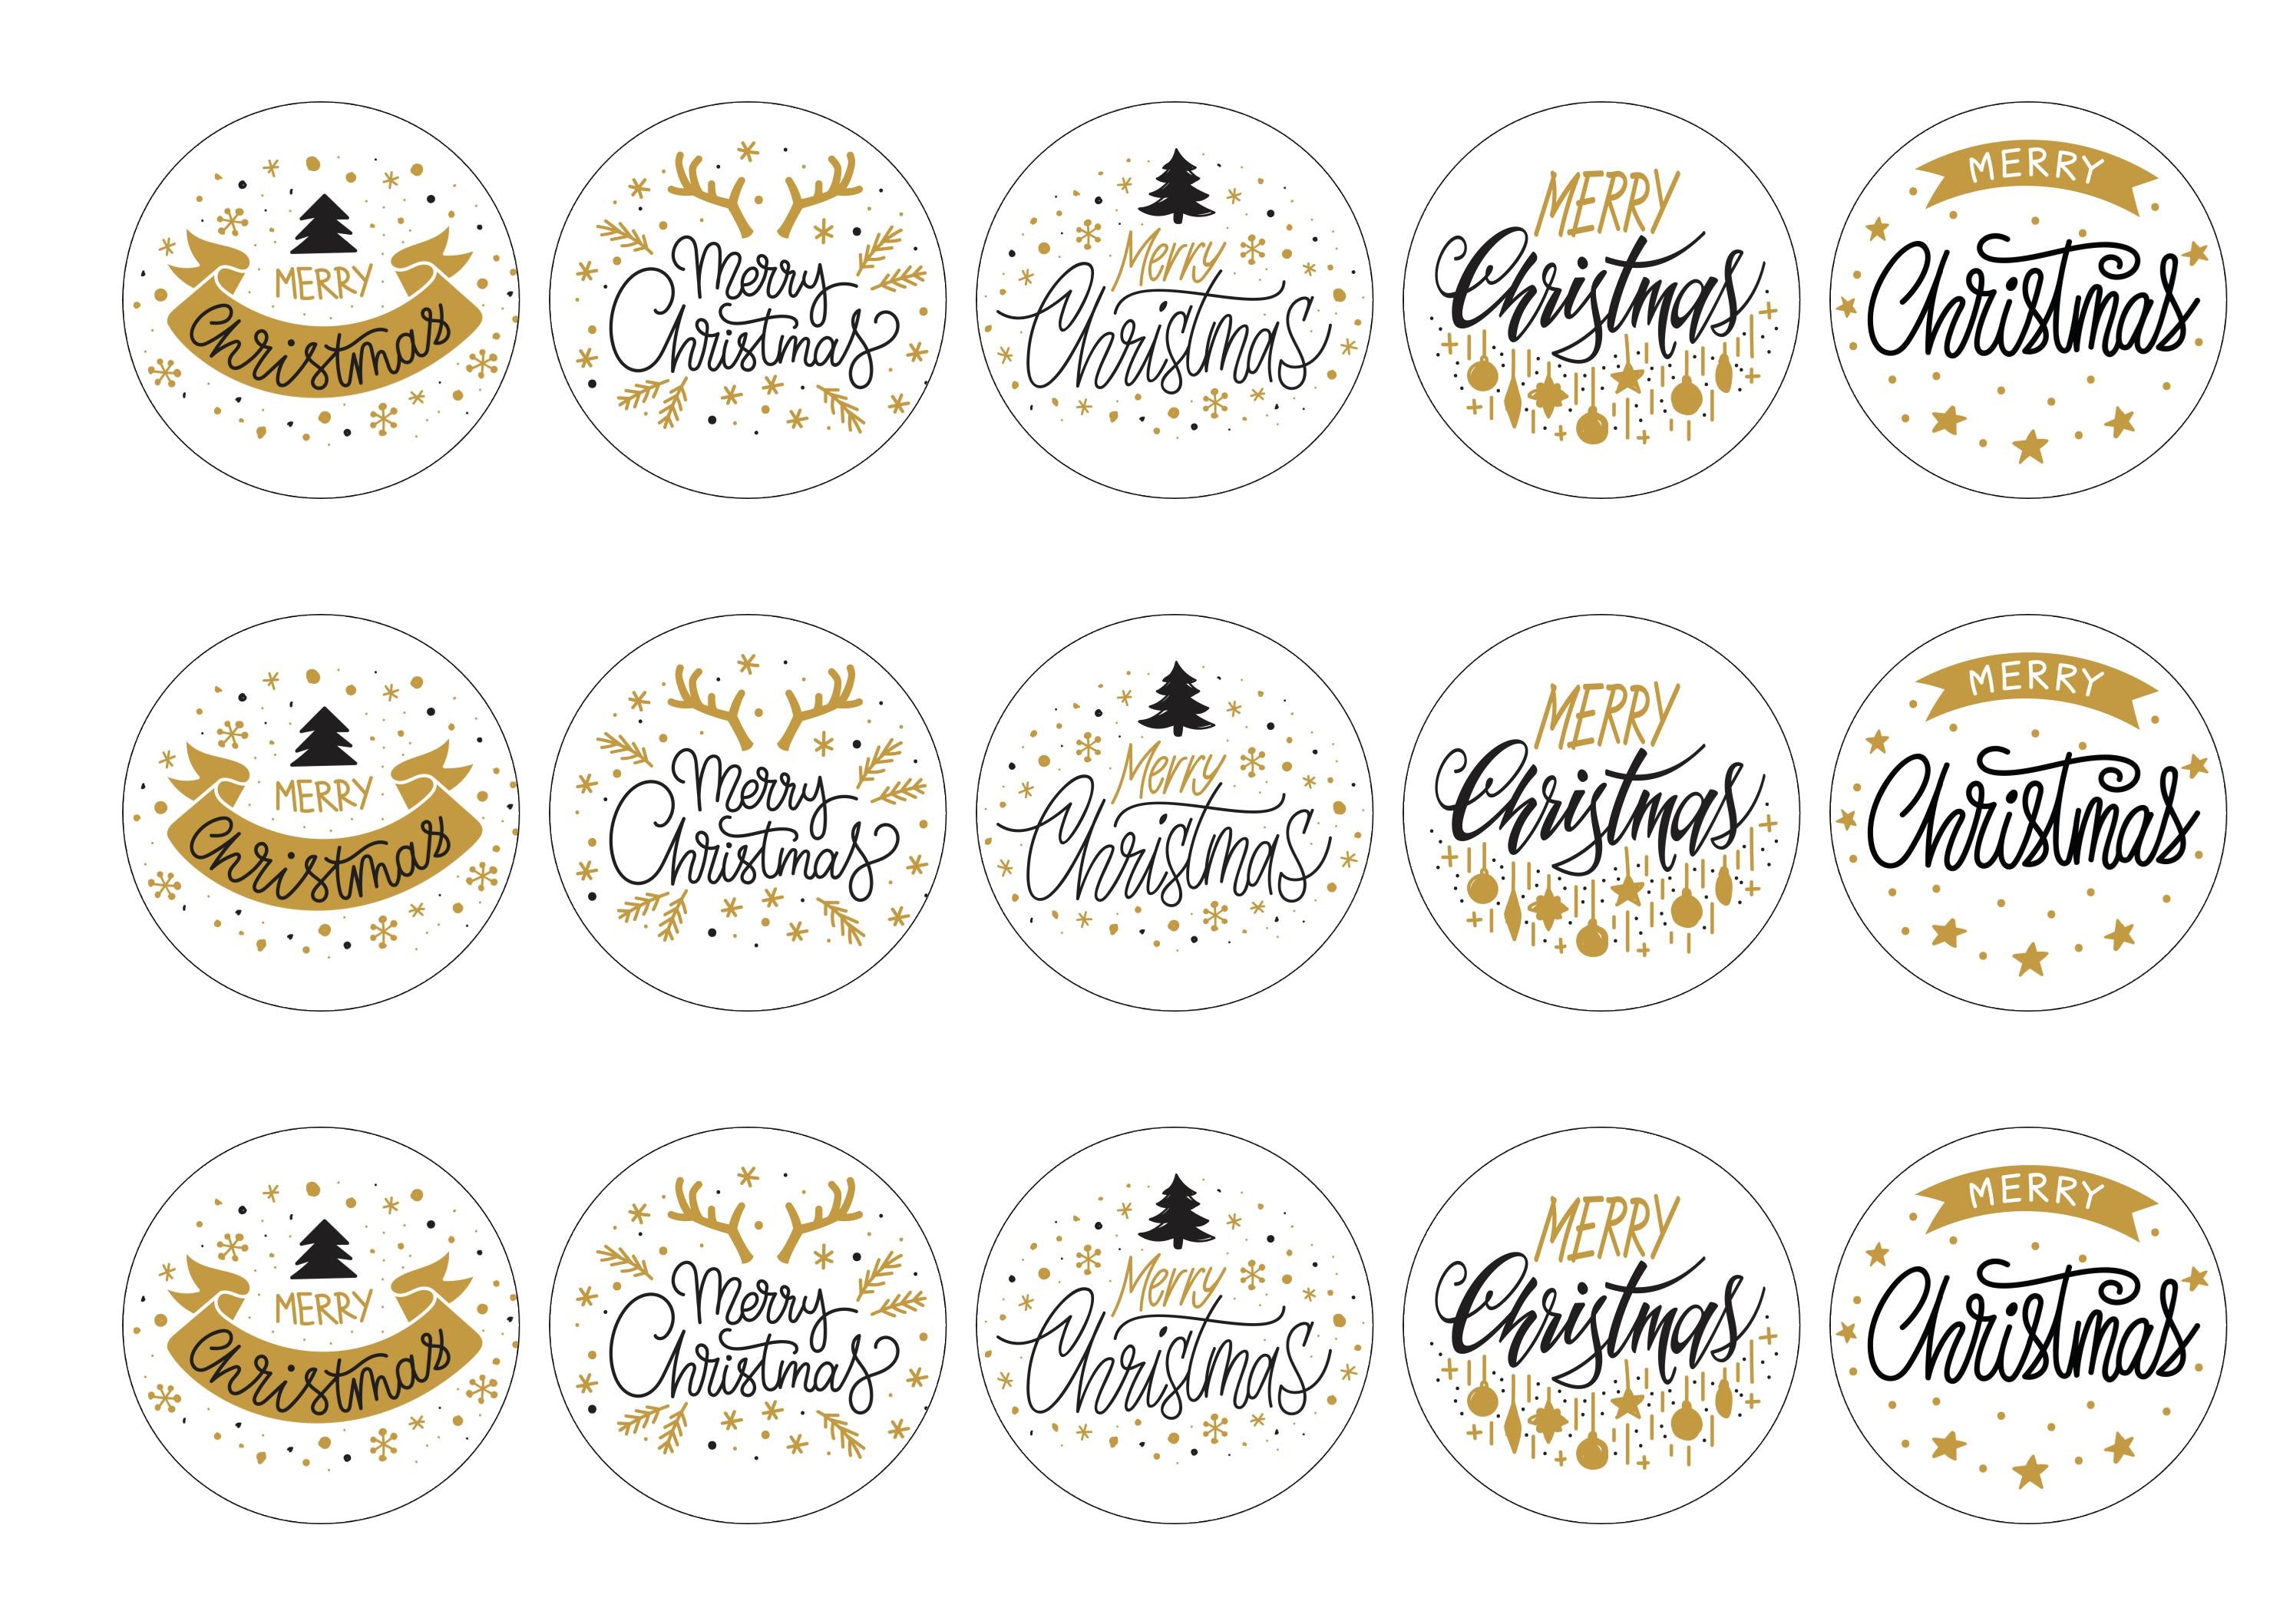 15 printed cupcake toppers with Merry Christmas messages in black and gold